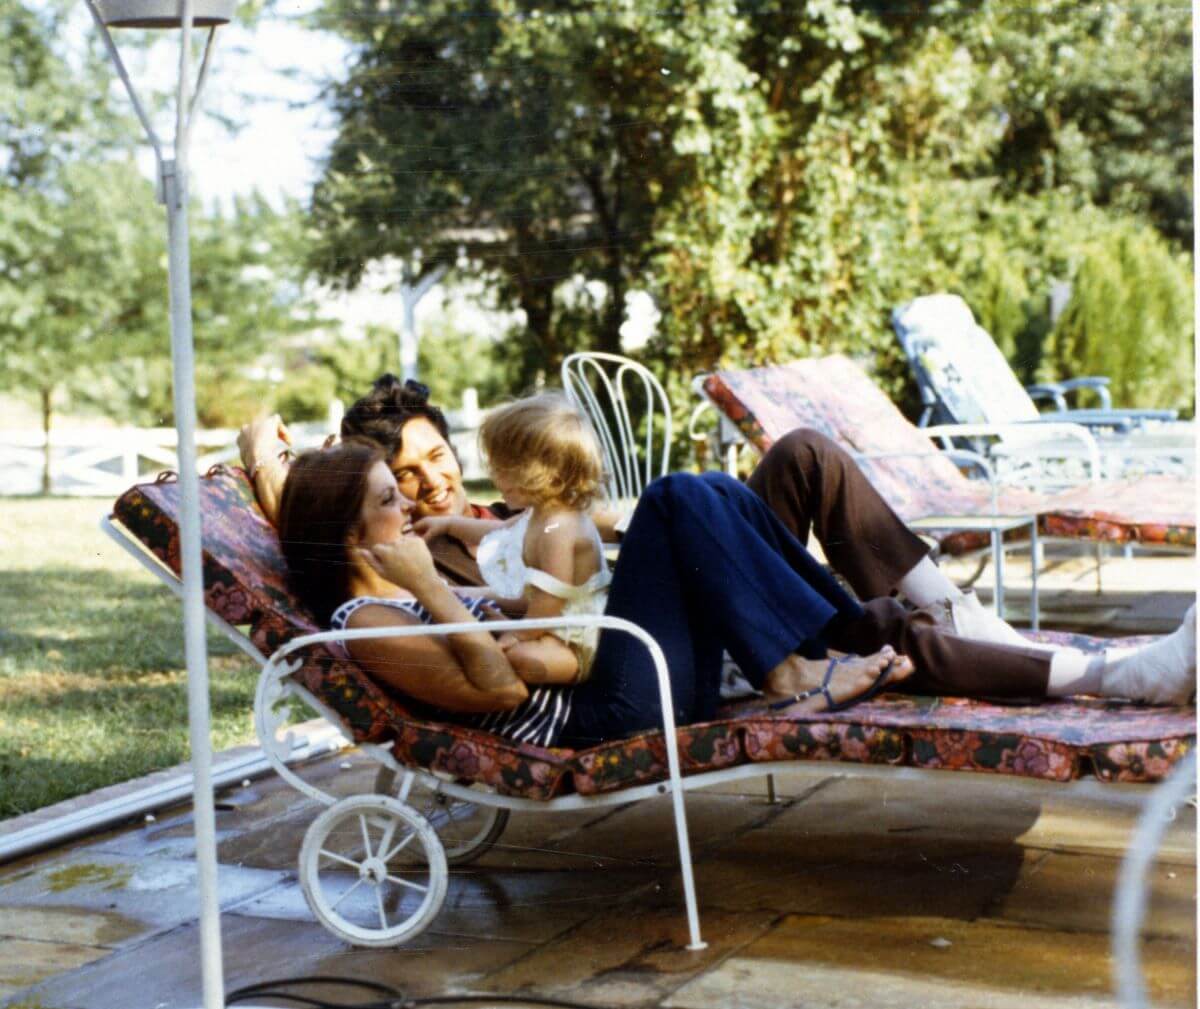 Priscilla Presley and Elvis lay on lounge chairs. Lisa Marie Presley sits on Priscilla's stomach.